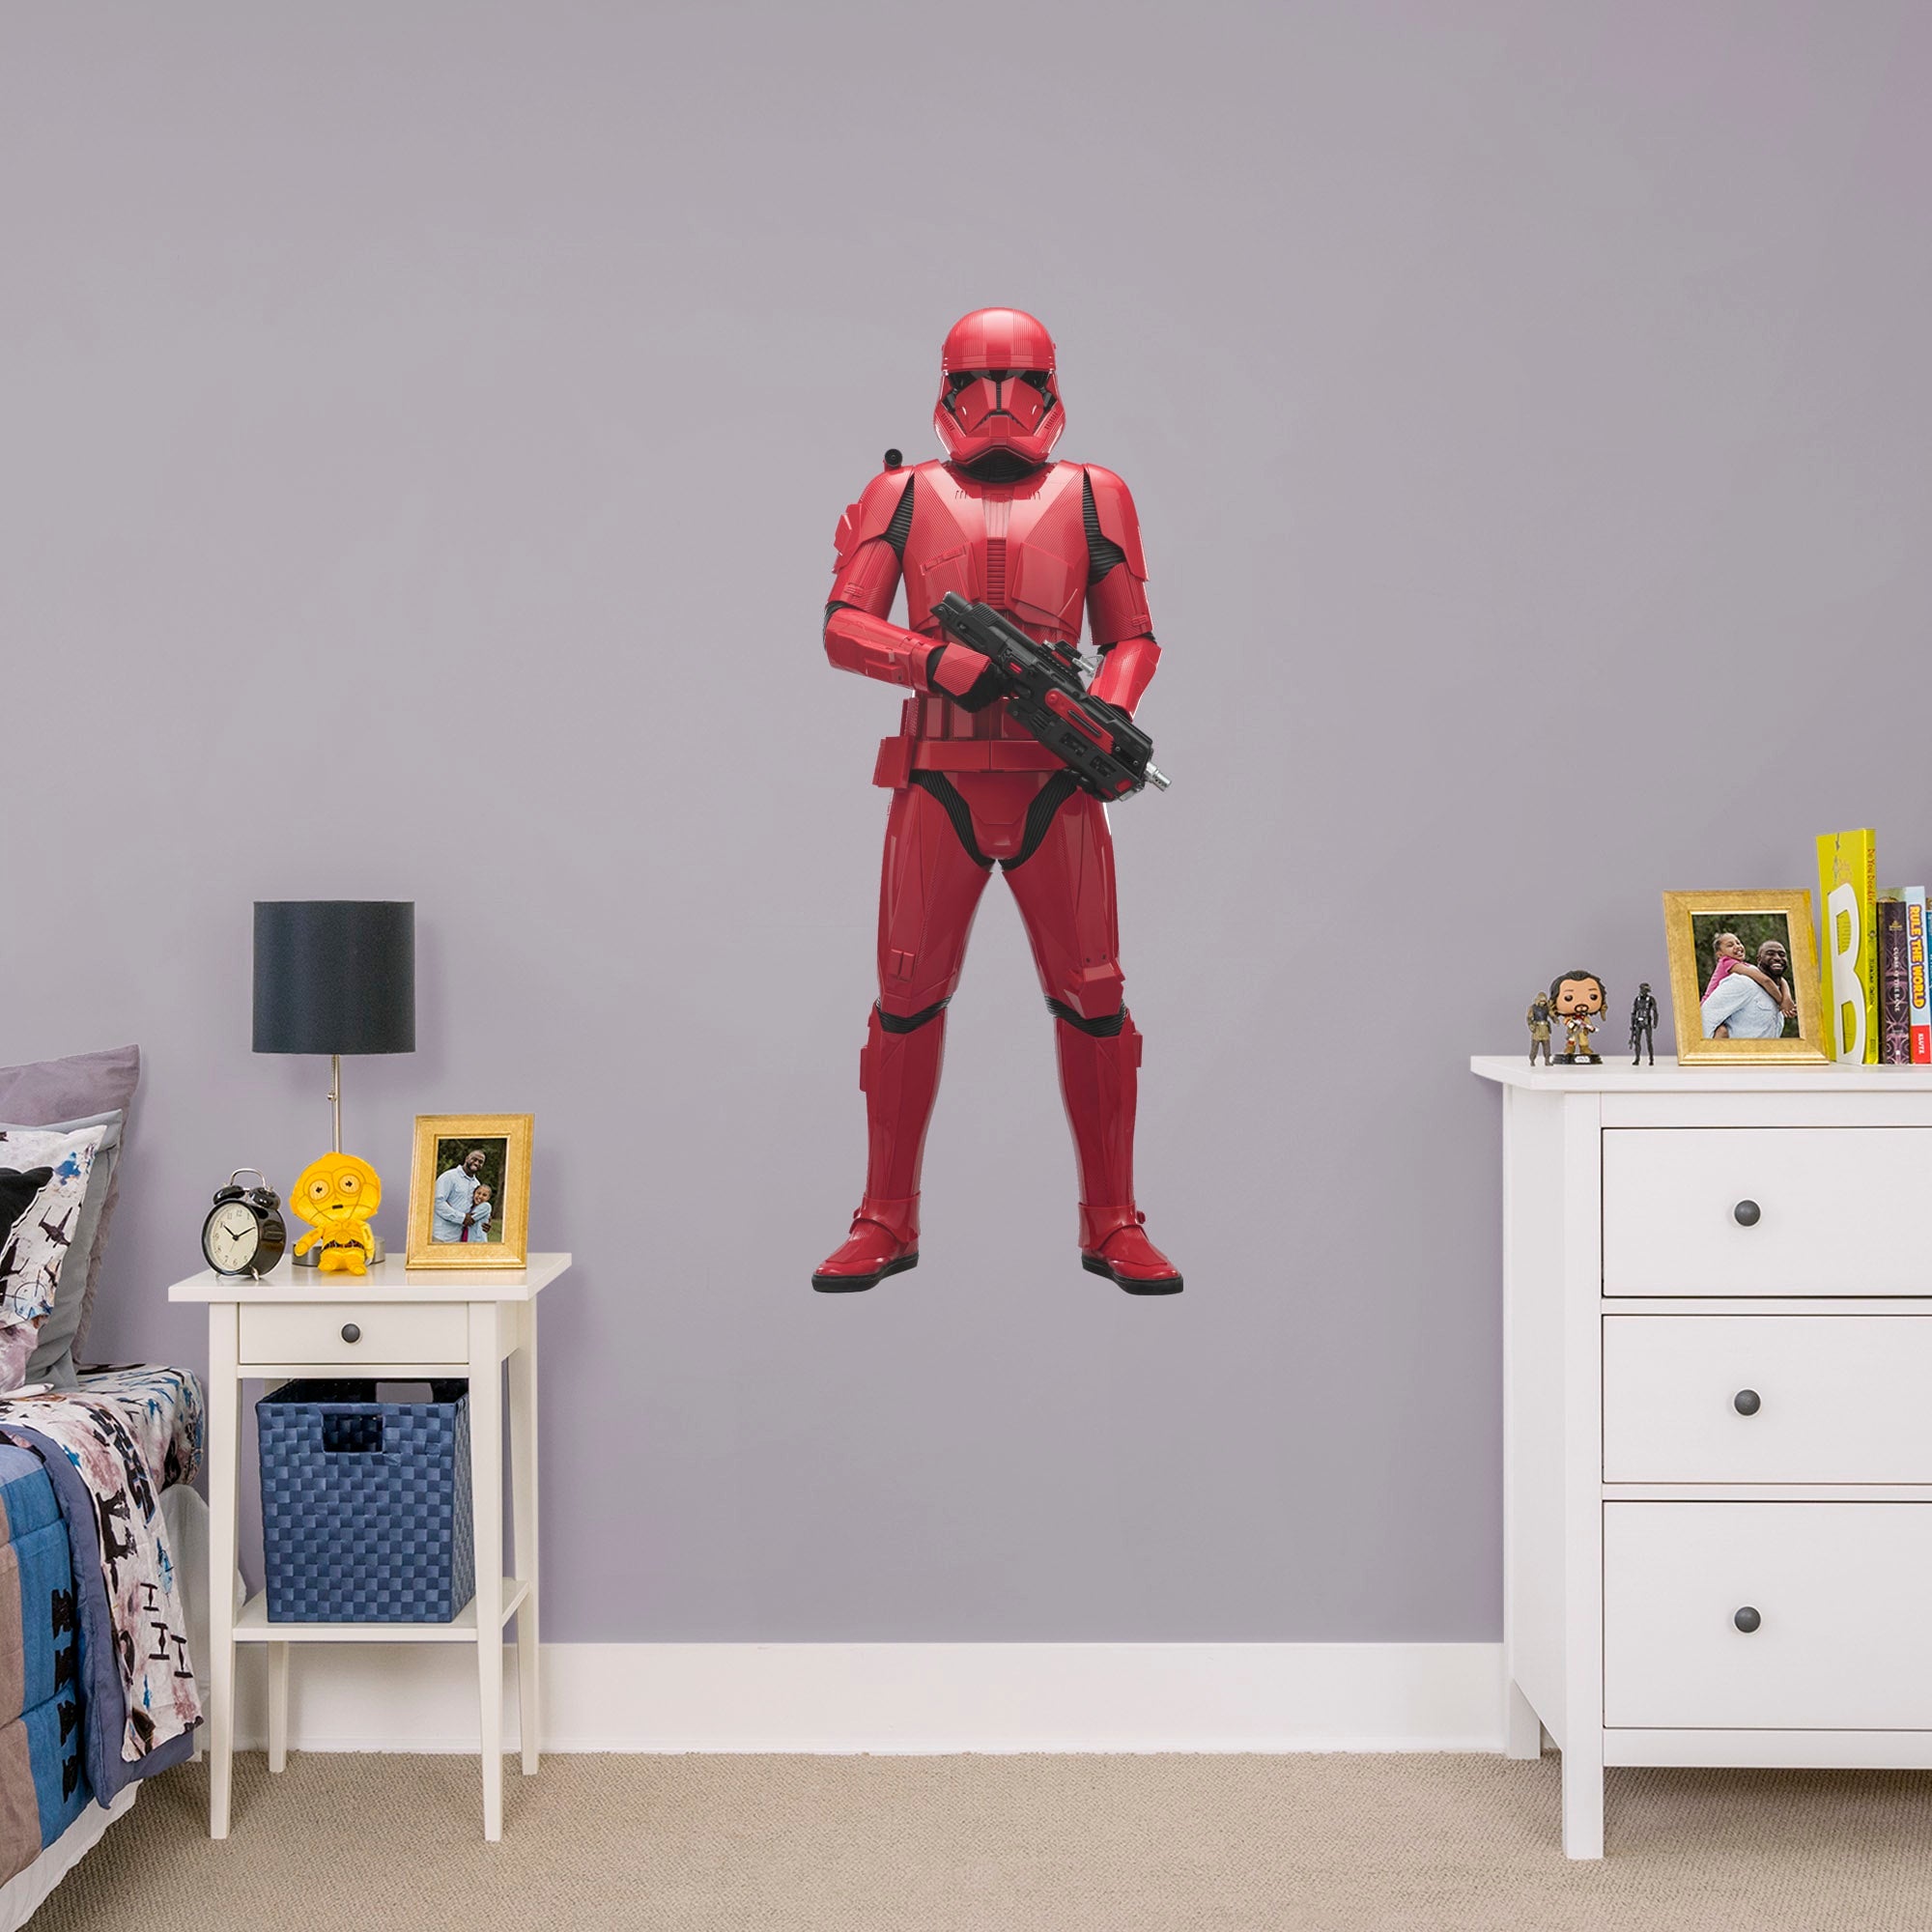 Sith Trooper - Officially Licensed Removable Wall Decal Giant Character + 2 Decals (19"W x 51"H) by Fathead | Vinyl